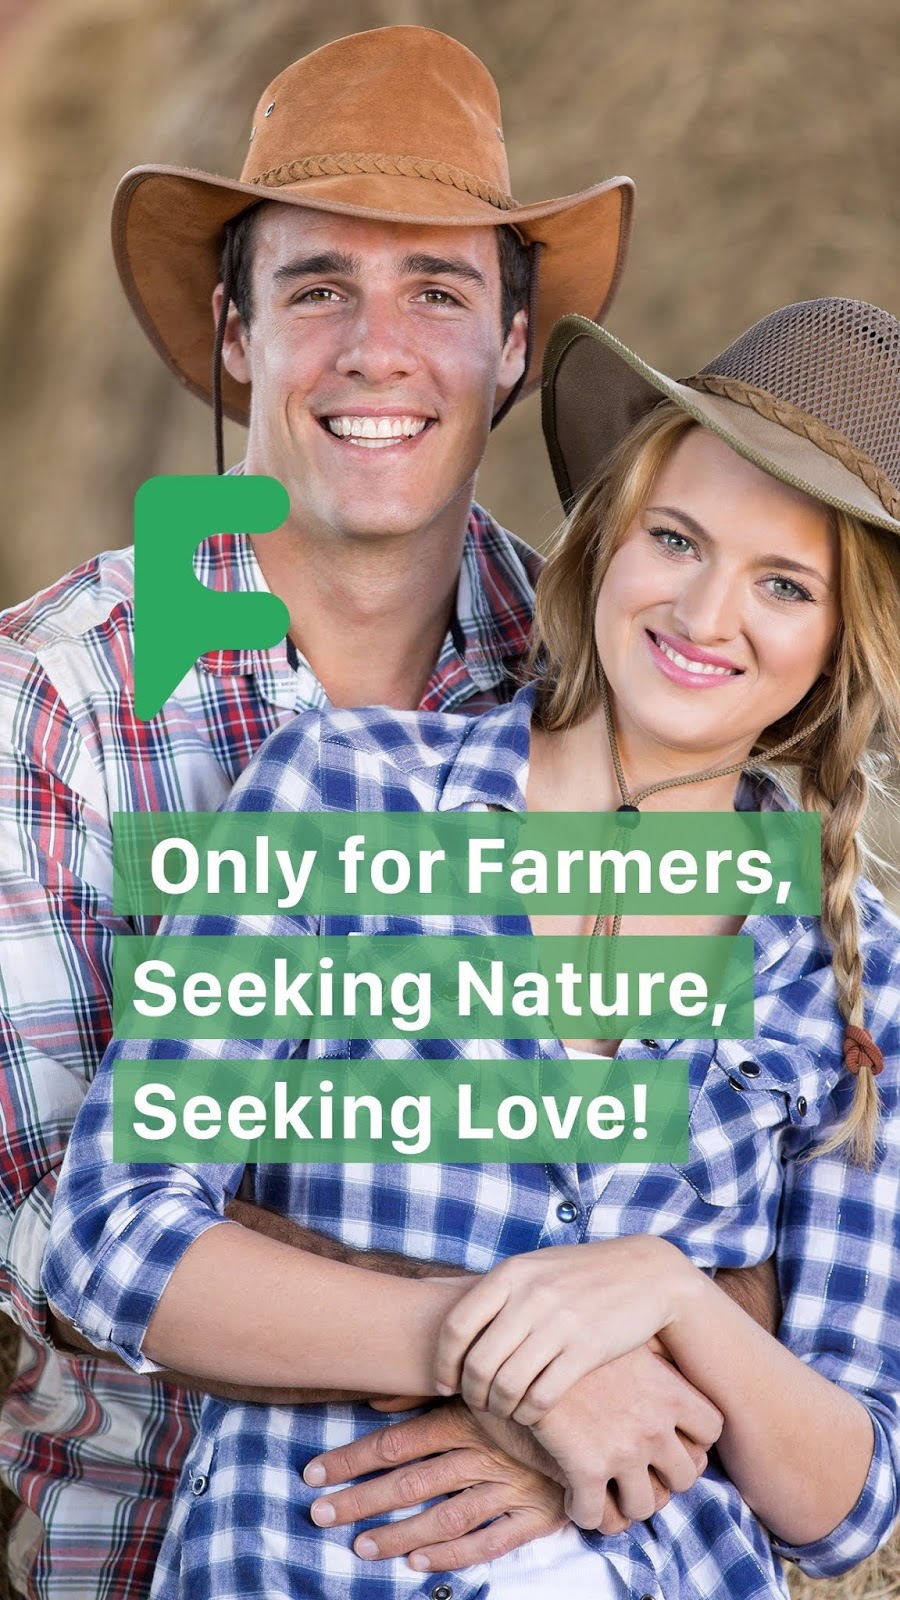 New "Tinder for Farmers" Dating App Brings Together People Looking to